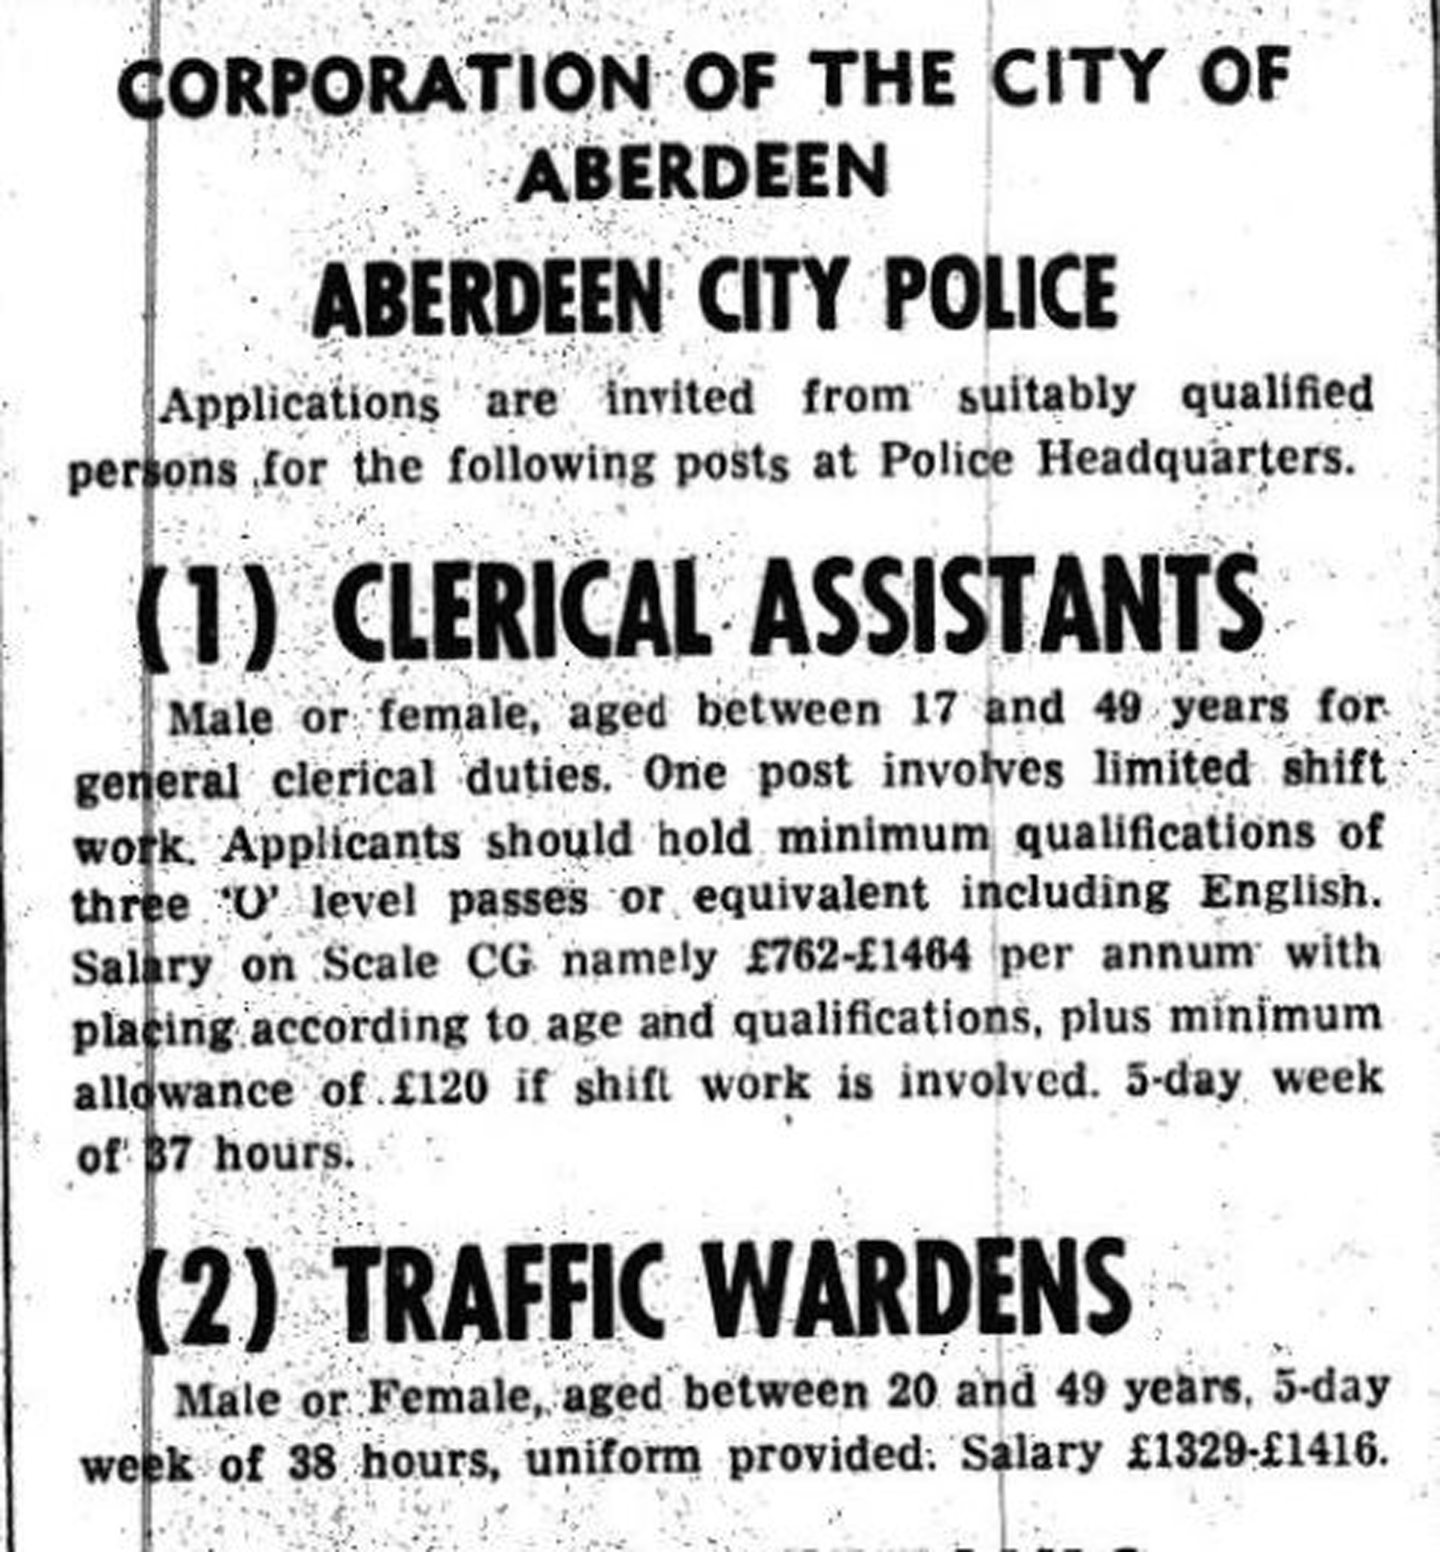 A newspaper advert for traffic wardens in Aberdeen from 1974